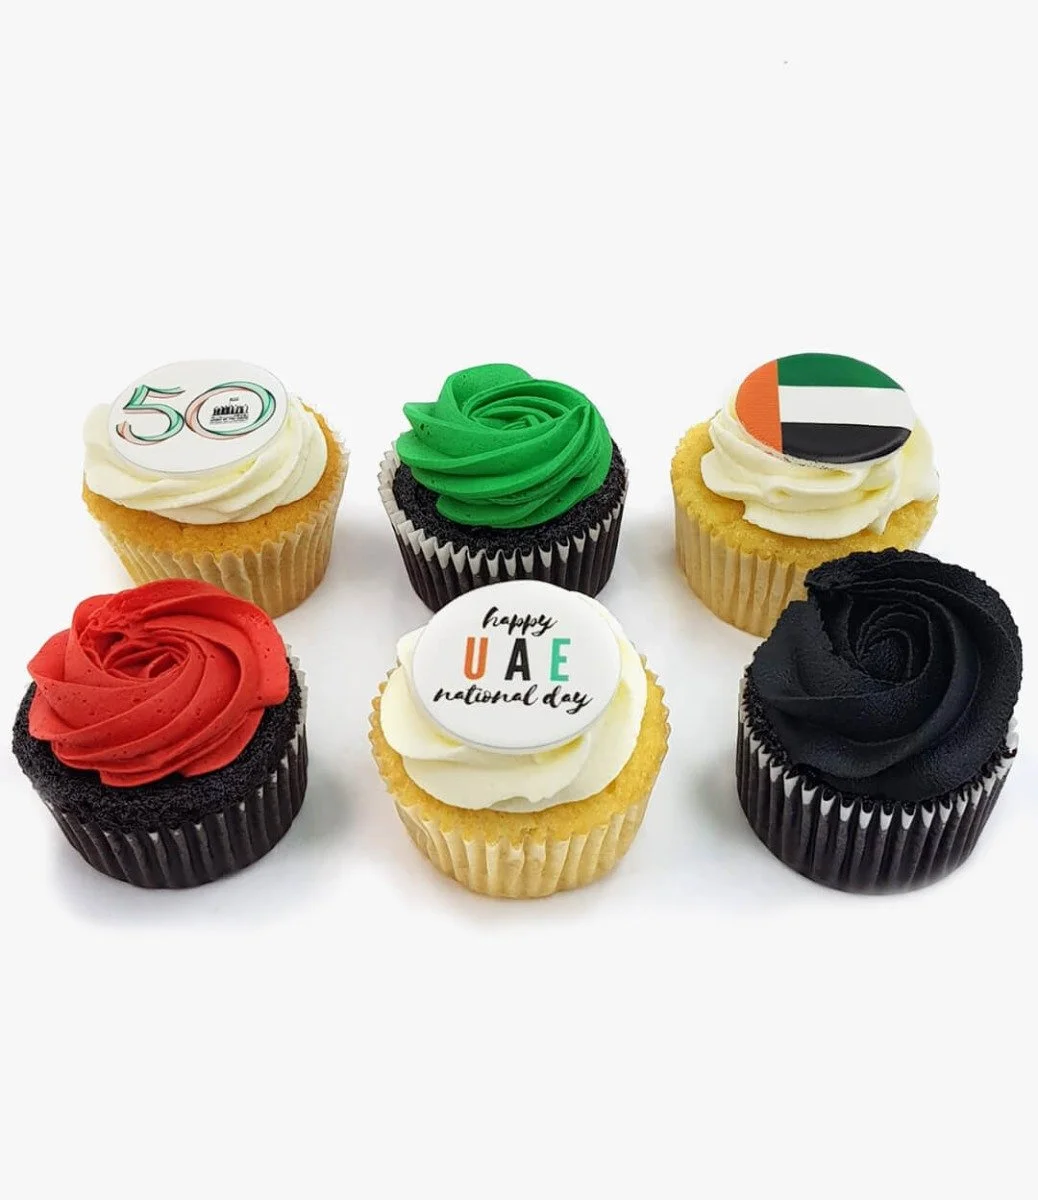 6 pcs National Day Cupcakes By Cake Social 